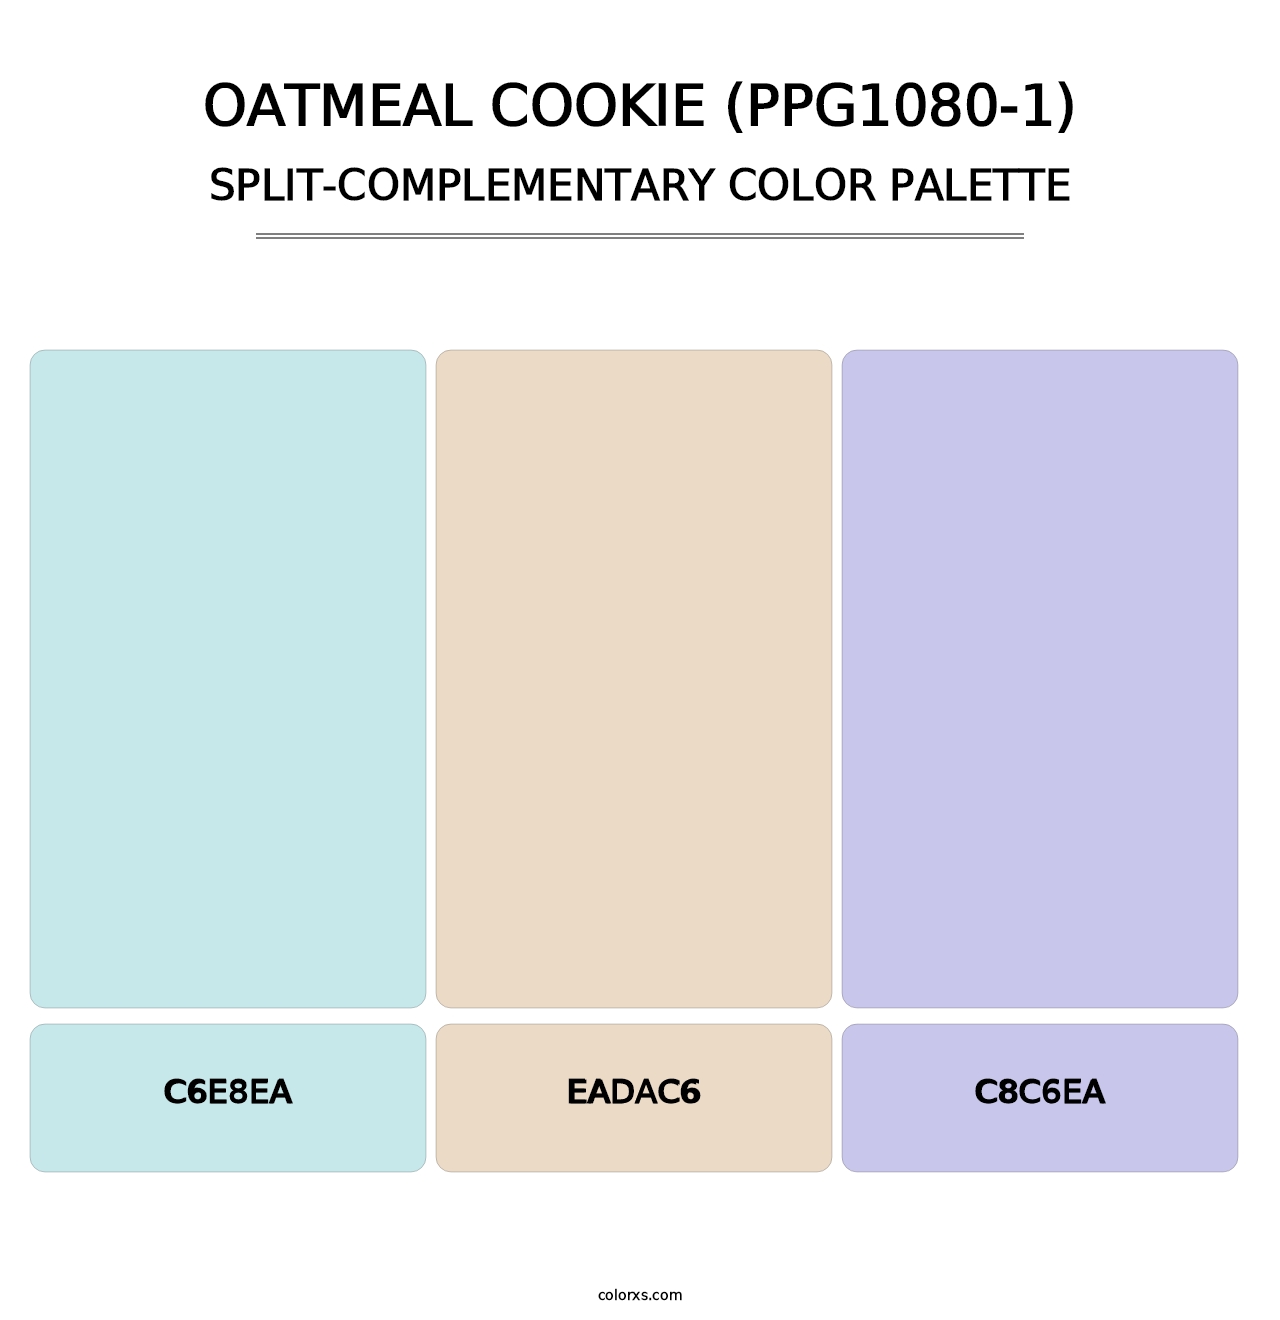 Oatmeal Cookie (PPG1080-1) - Split-Complementary Color Palette